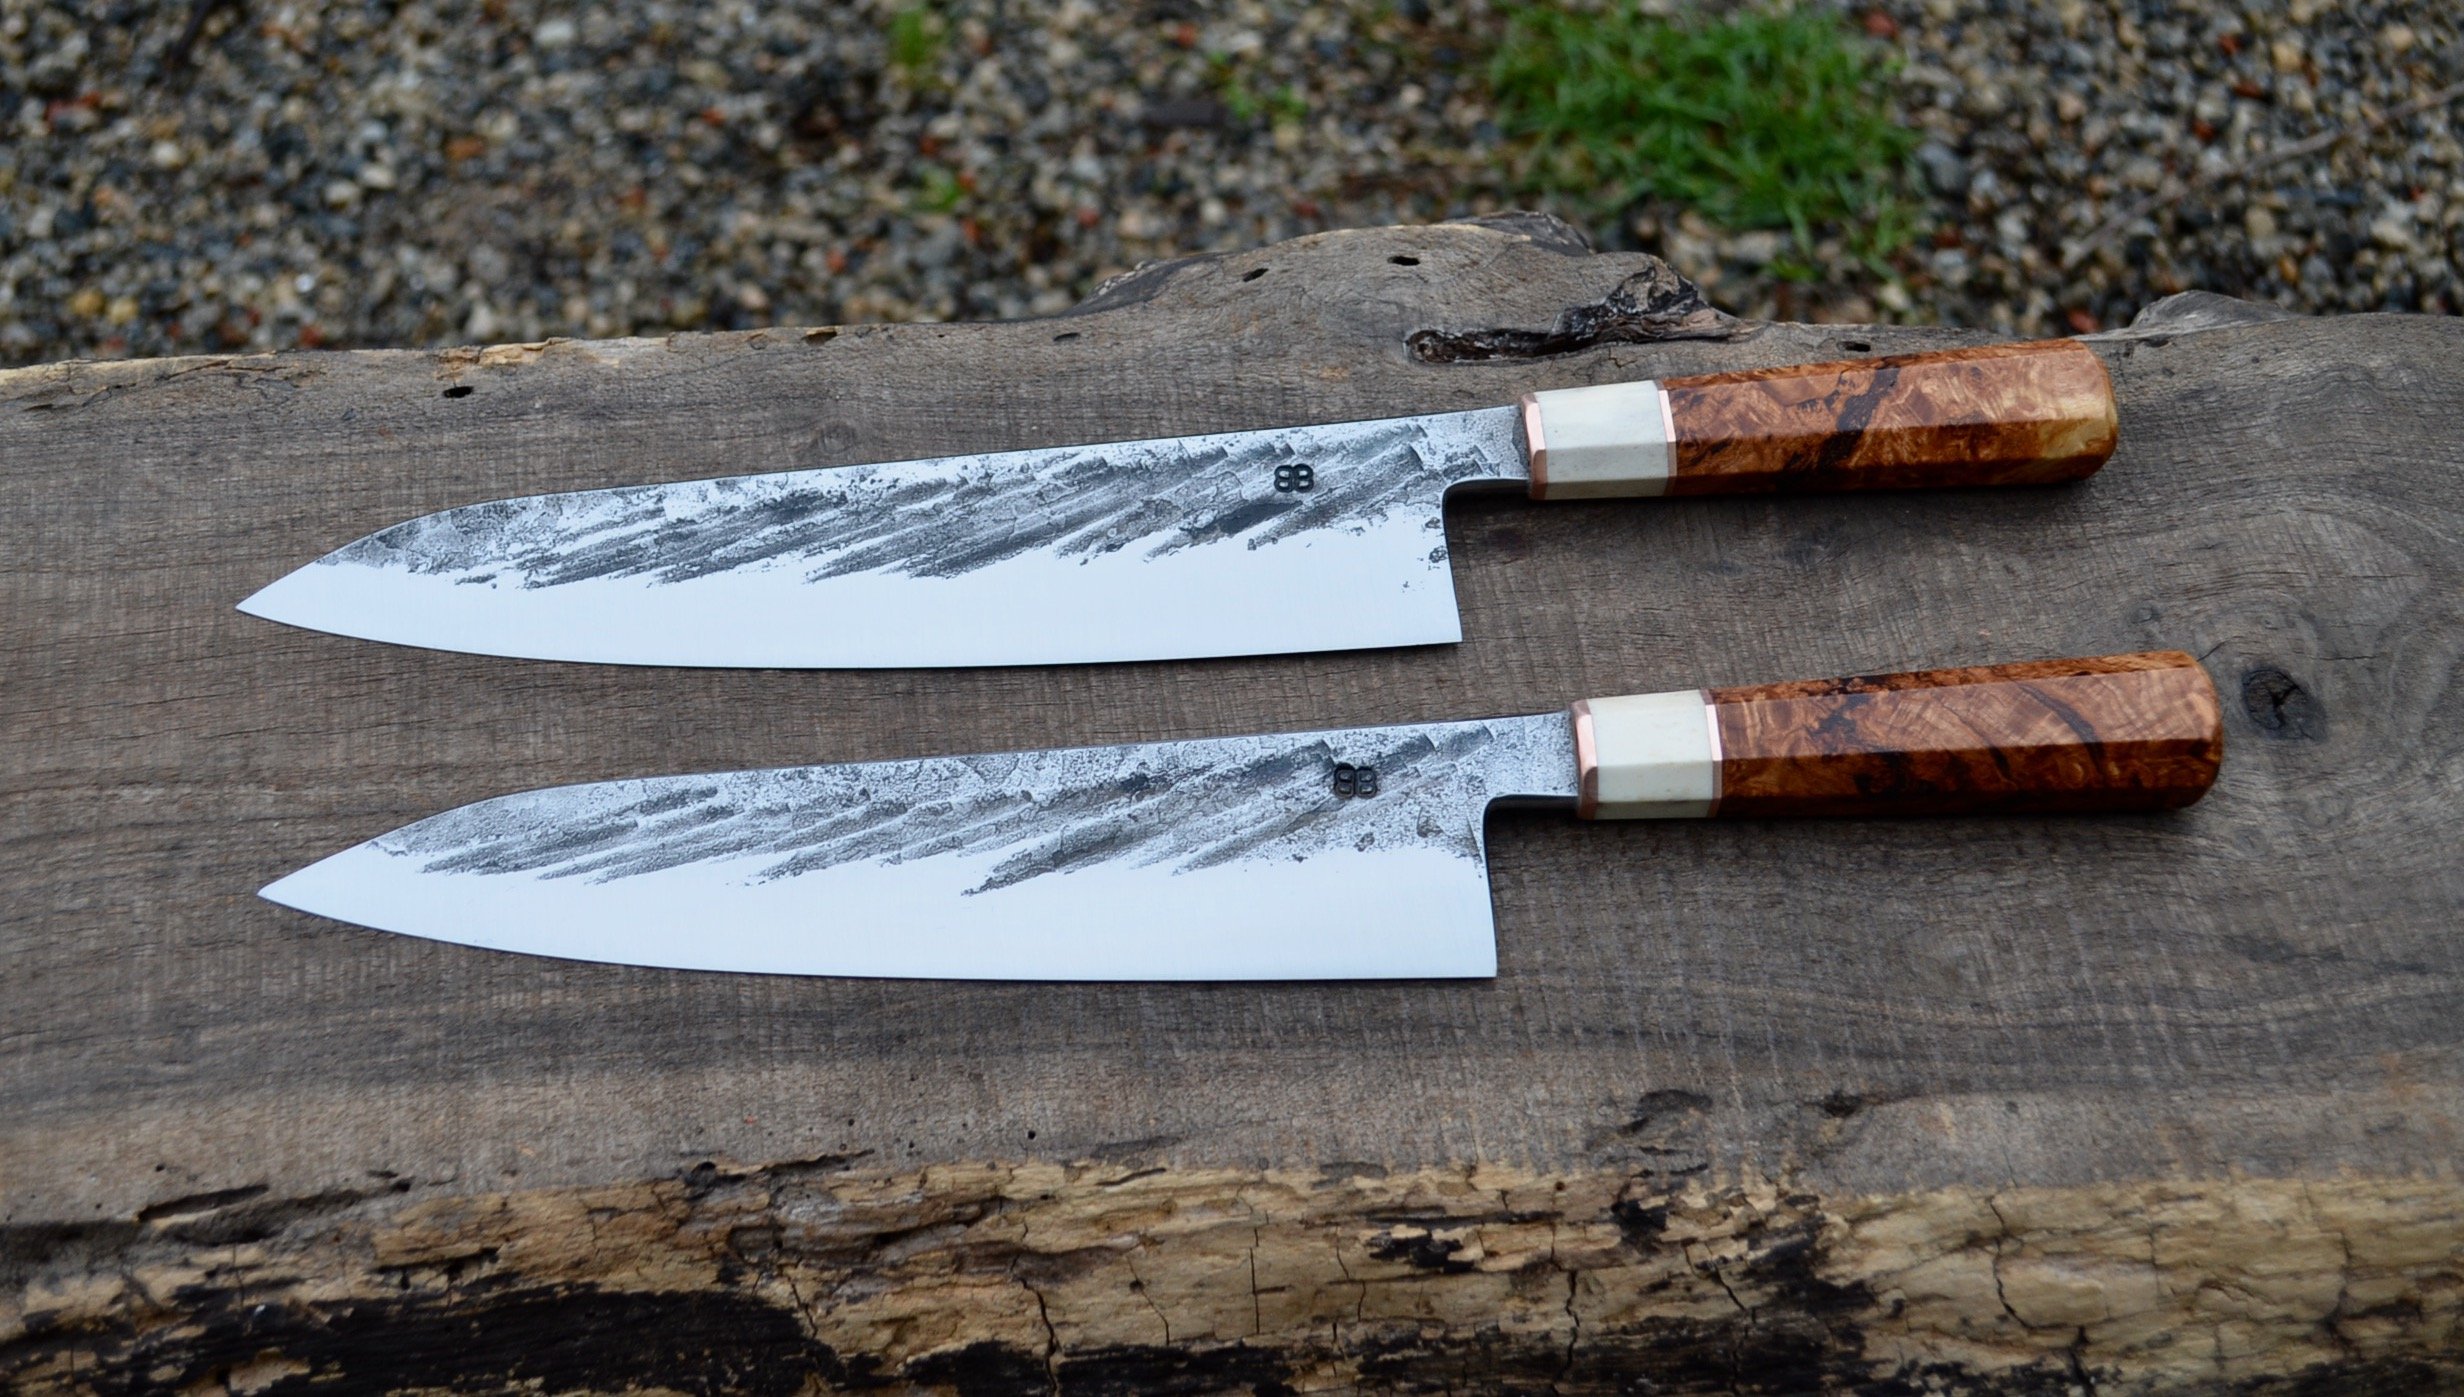  240mm Hidden-tang Yo Deba with forge finish. Octagonal Aspen Burl handles with copper faceplates and antler and copper spacers. 